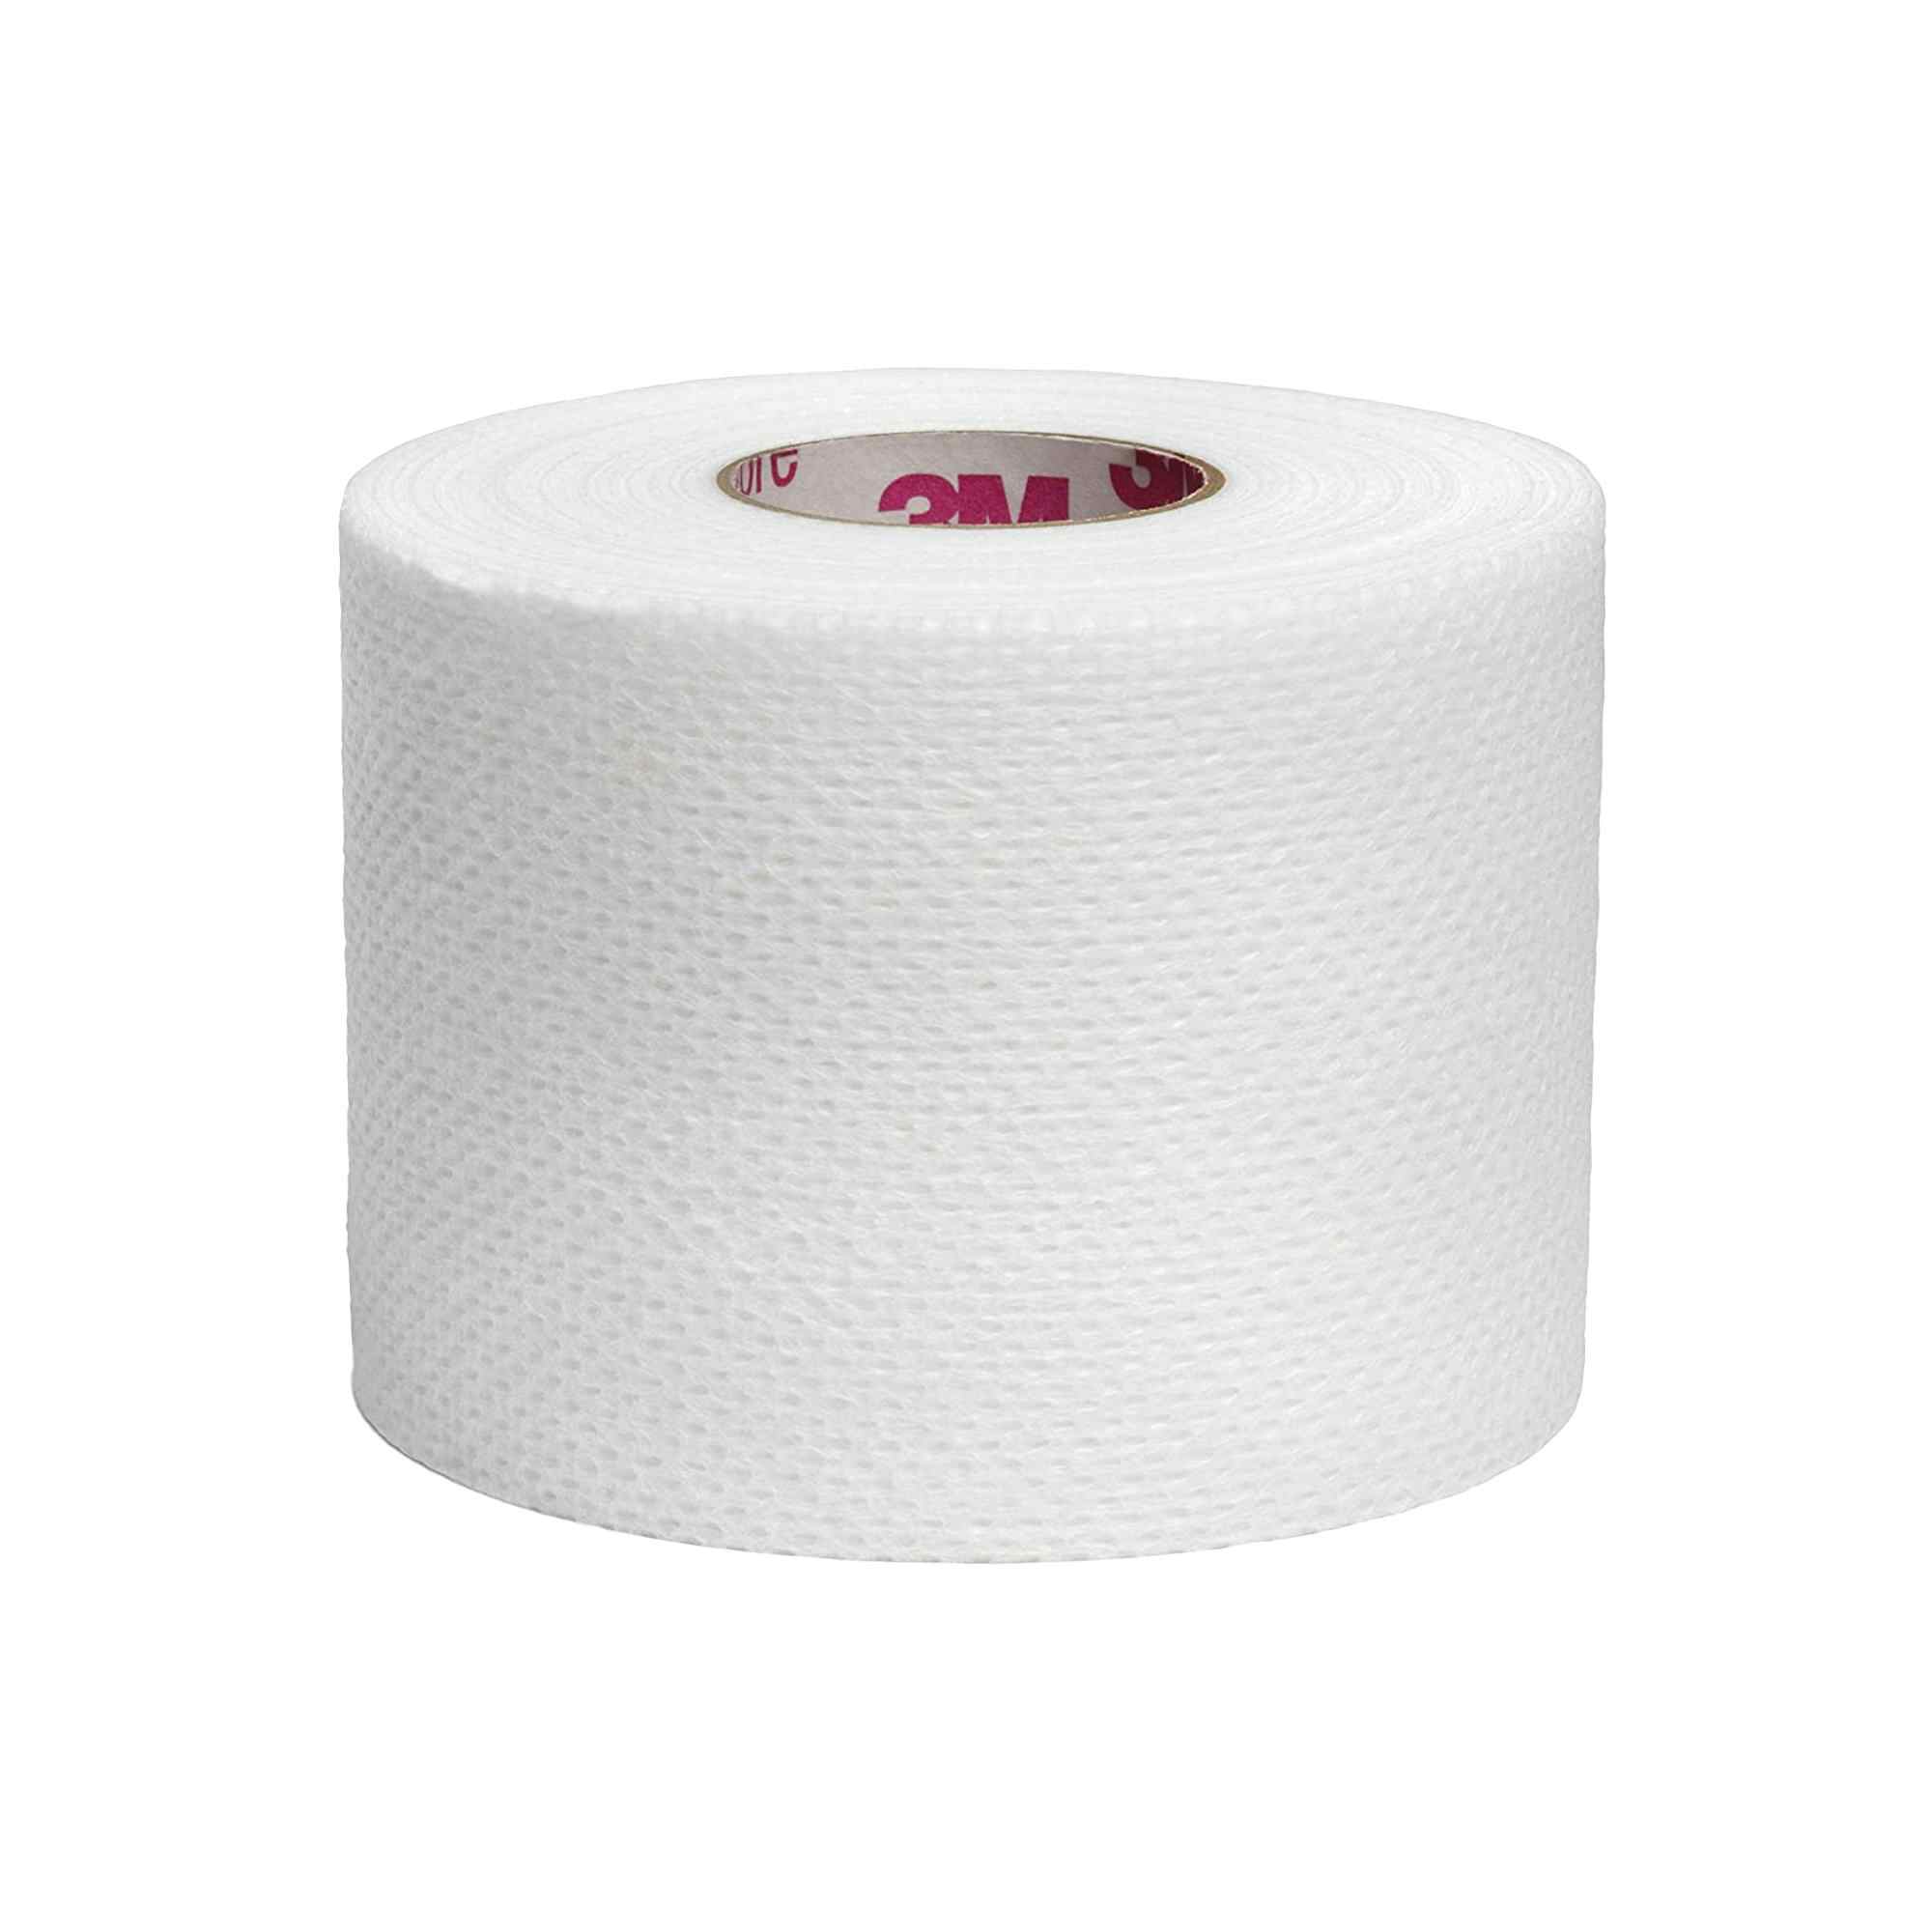 3M Medipore H Water Resistant Cloth Medical Tape, 2" X 2 yd